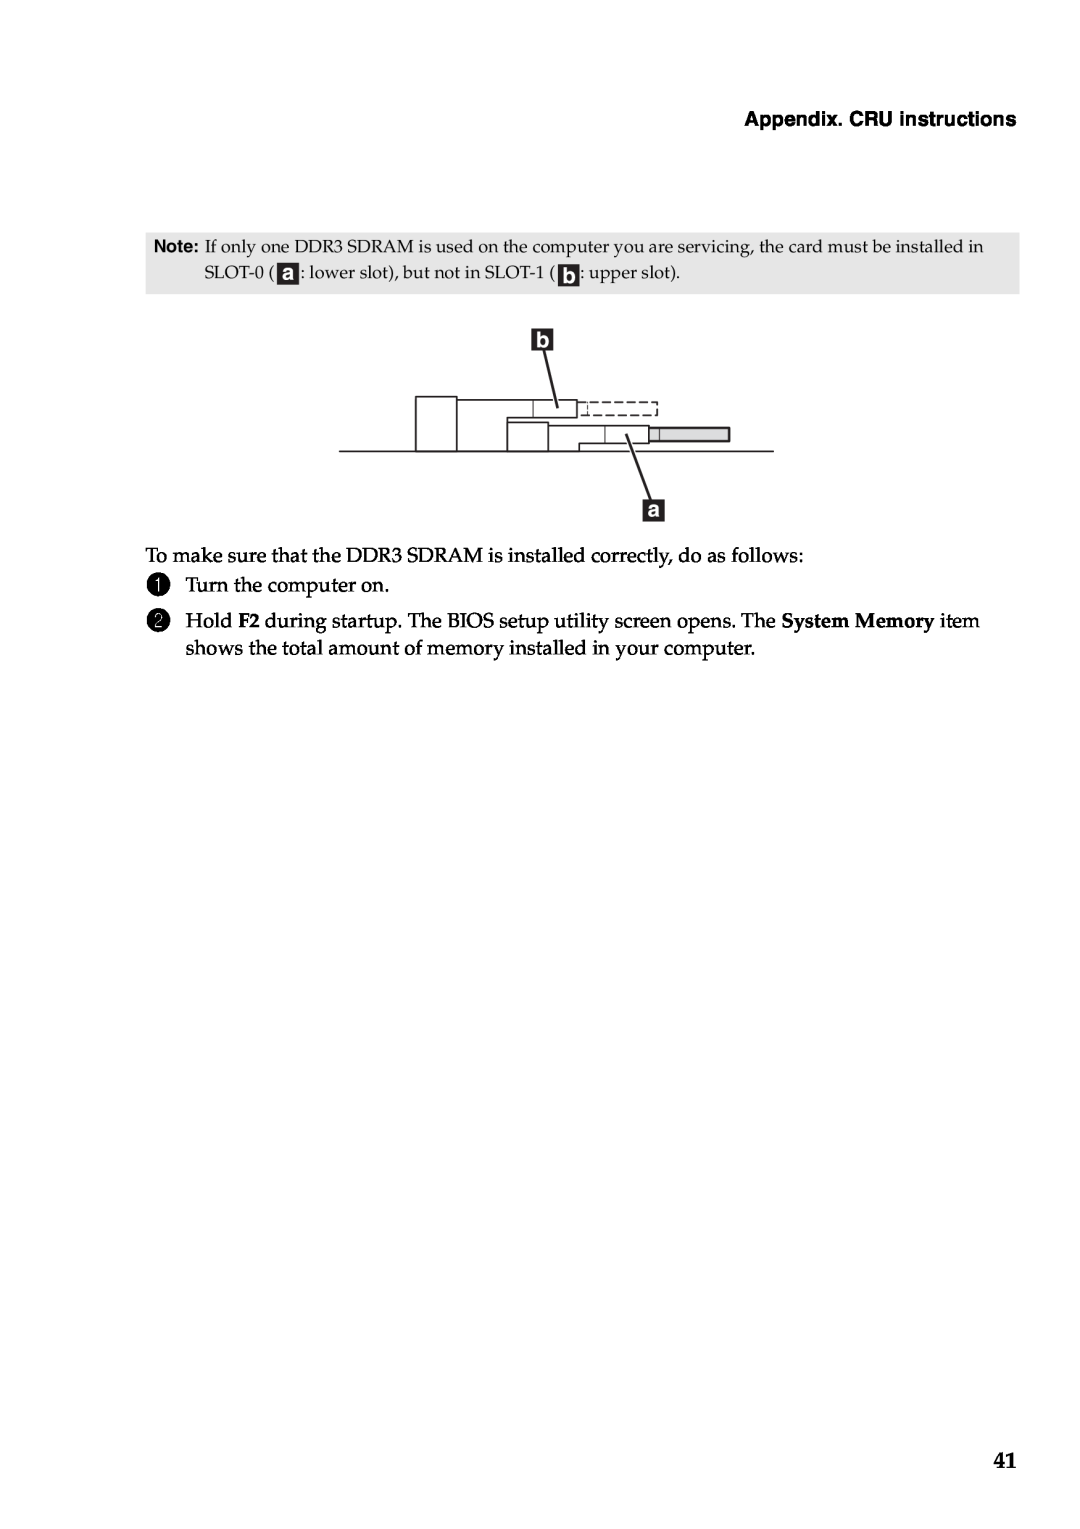 Lenovo Y471A manual Appendix. CRU instructions, To make sure that the DDR3 SDRAM is installed correctly, do as follows 